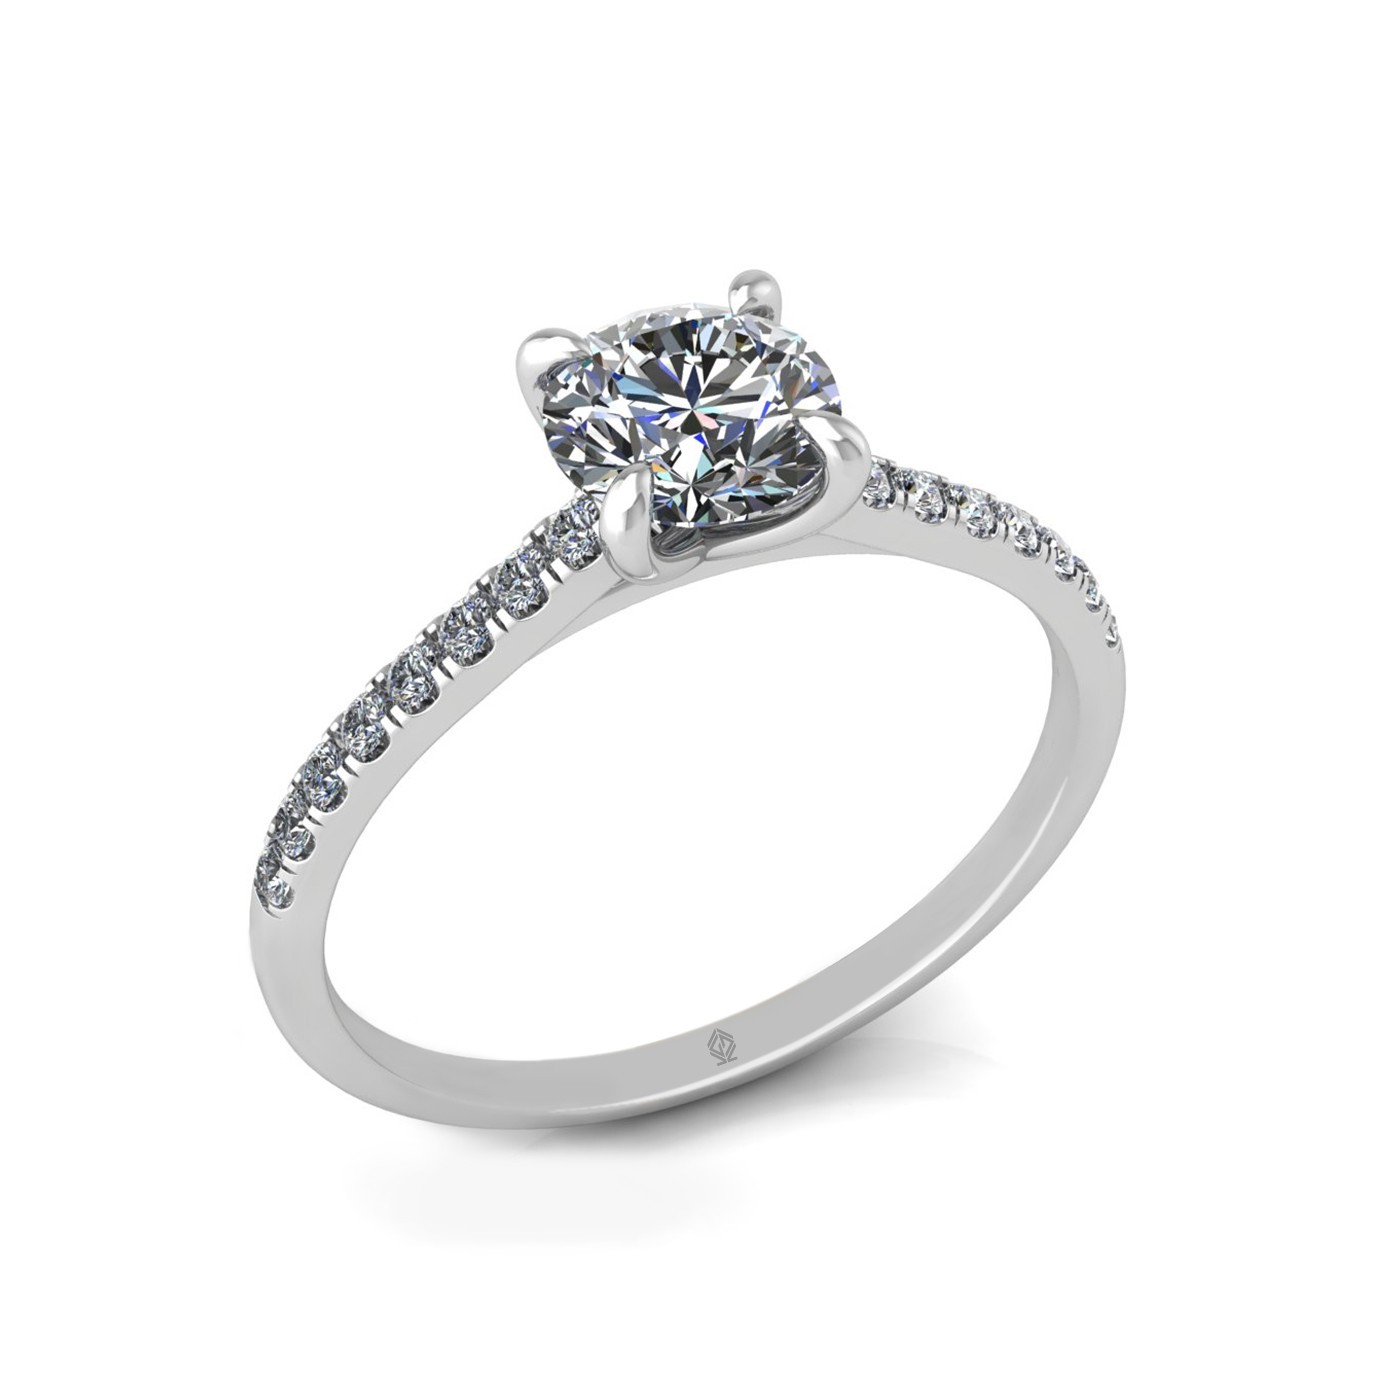 18K WHITE GOLD 4 PRONGS ROUND CUT DIAMOND ENGAGEMENT RING WITH WHISPER THIN PAVÉ SET BAND